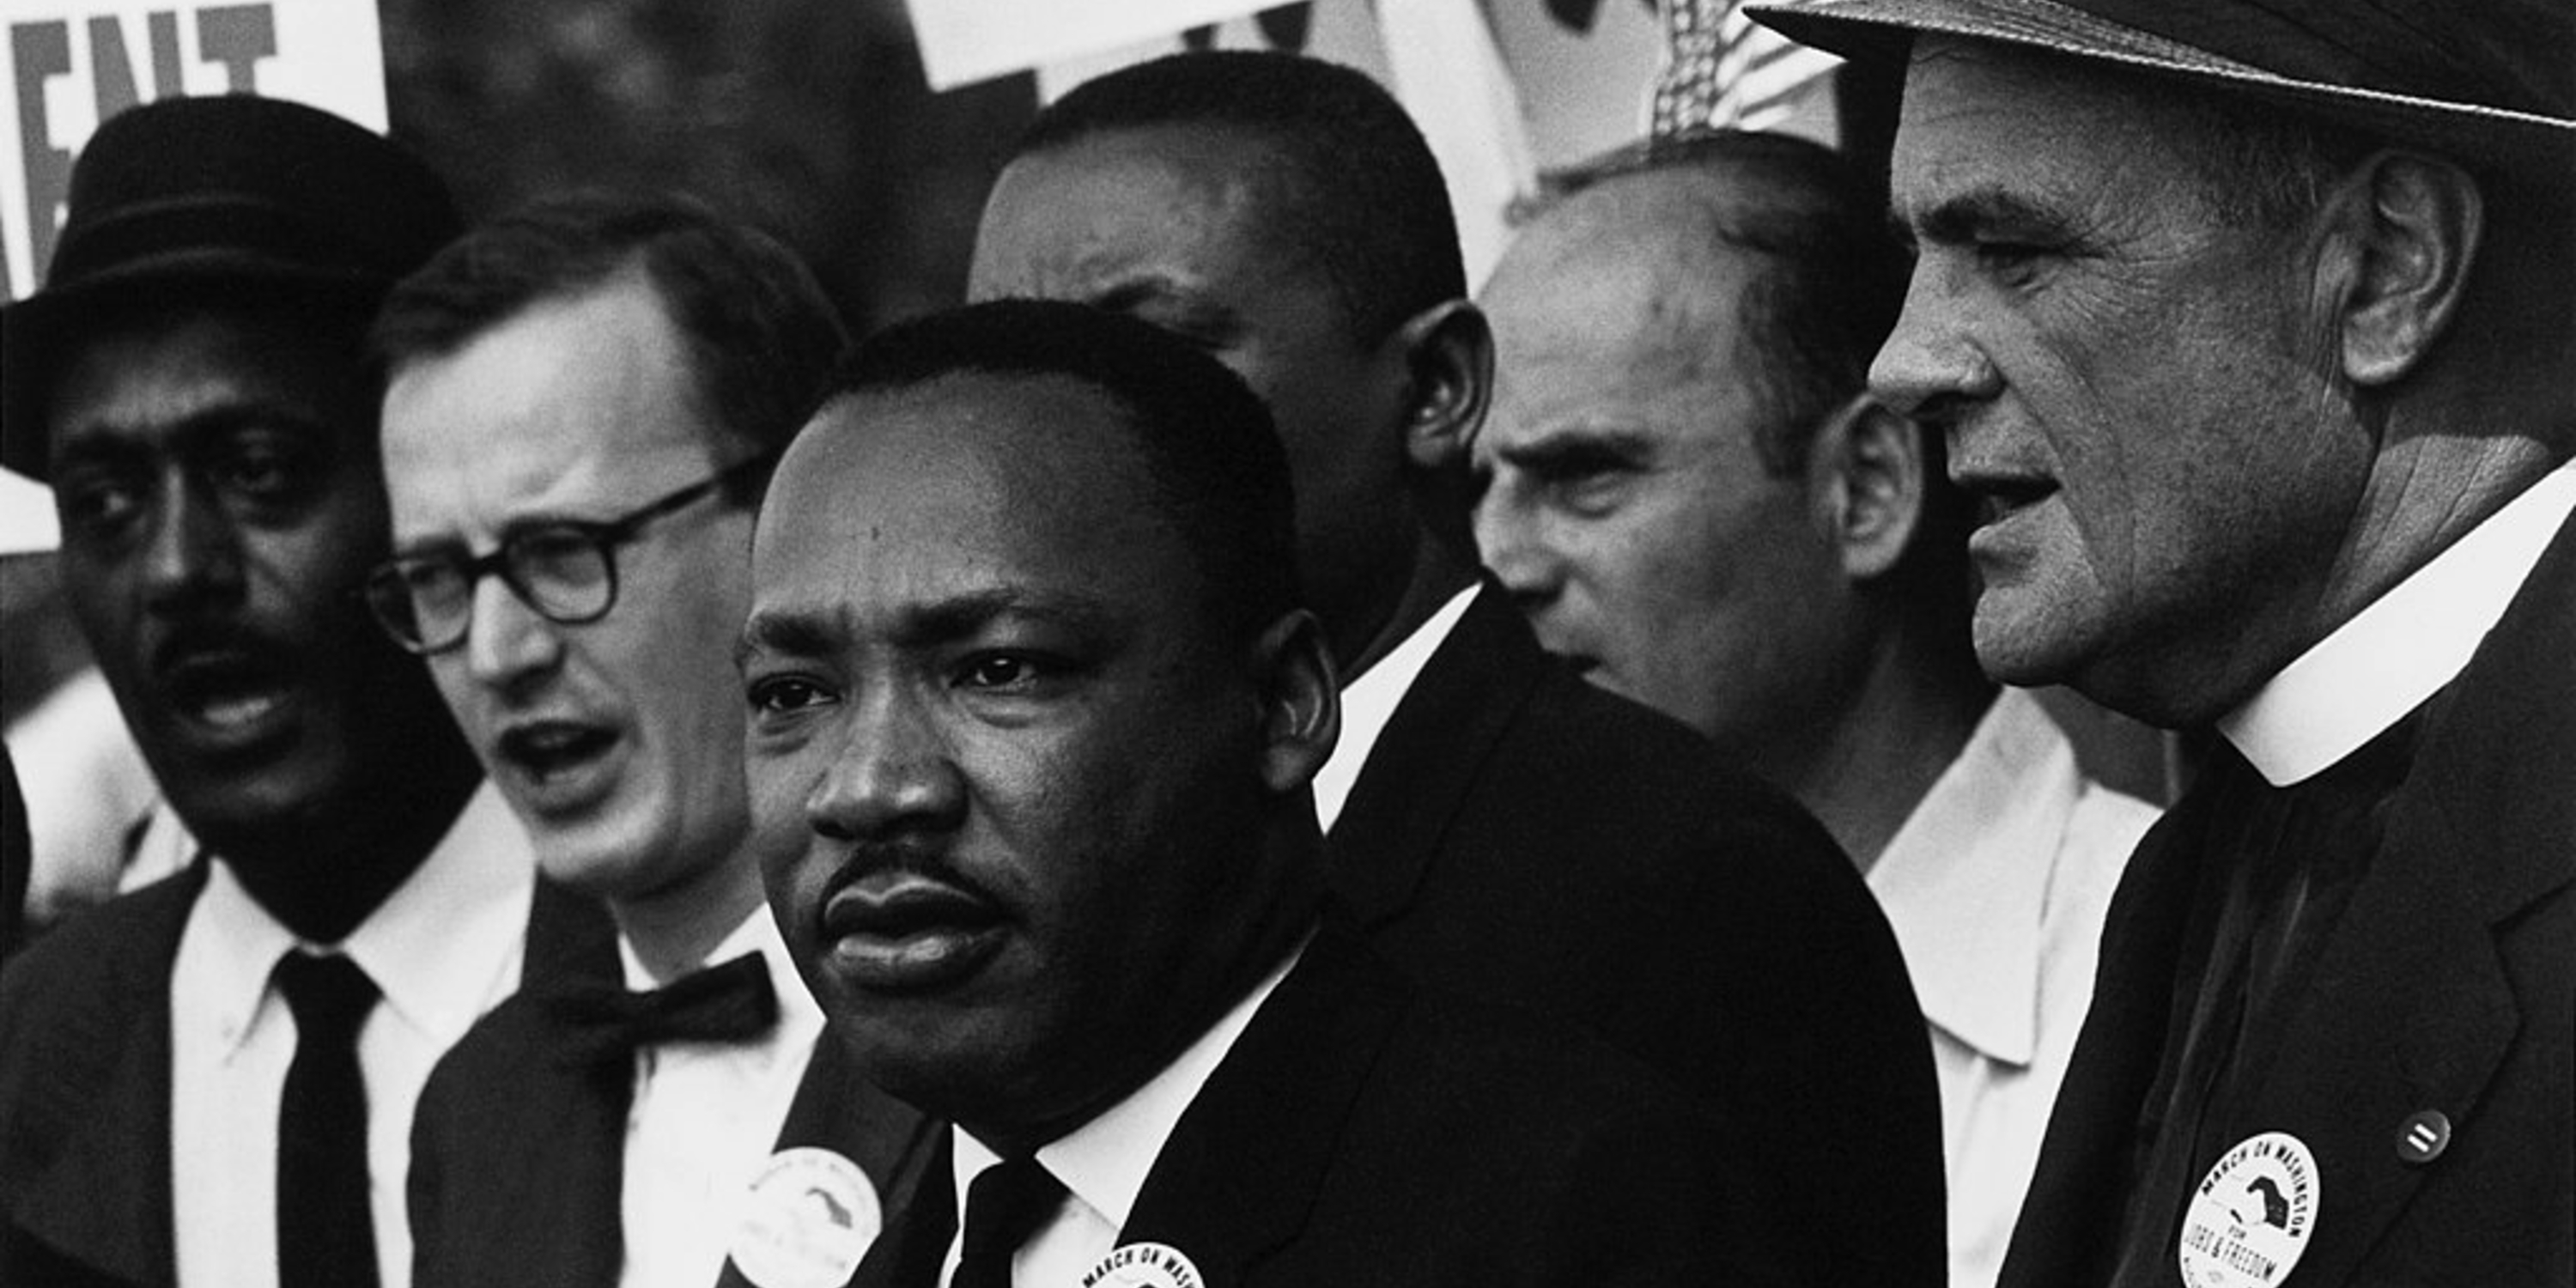 Martin Luther King, Jr., at Civil Right March on Washington